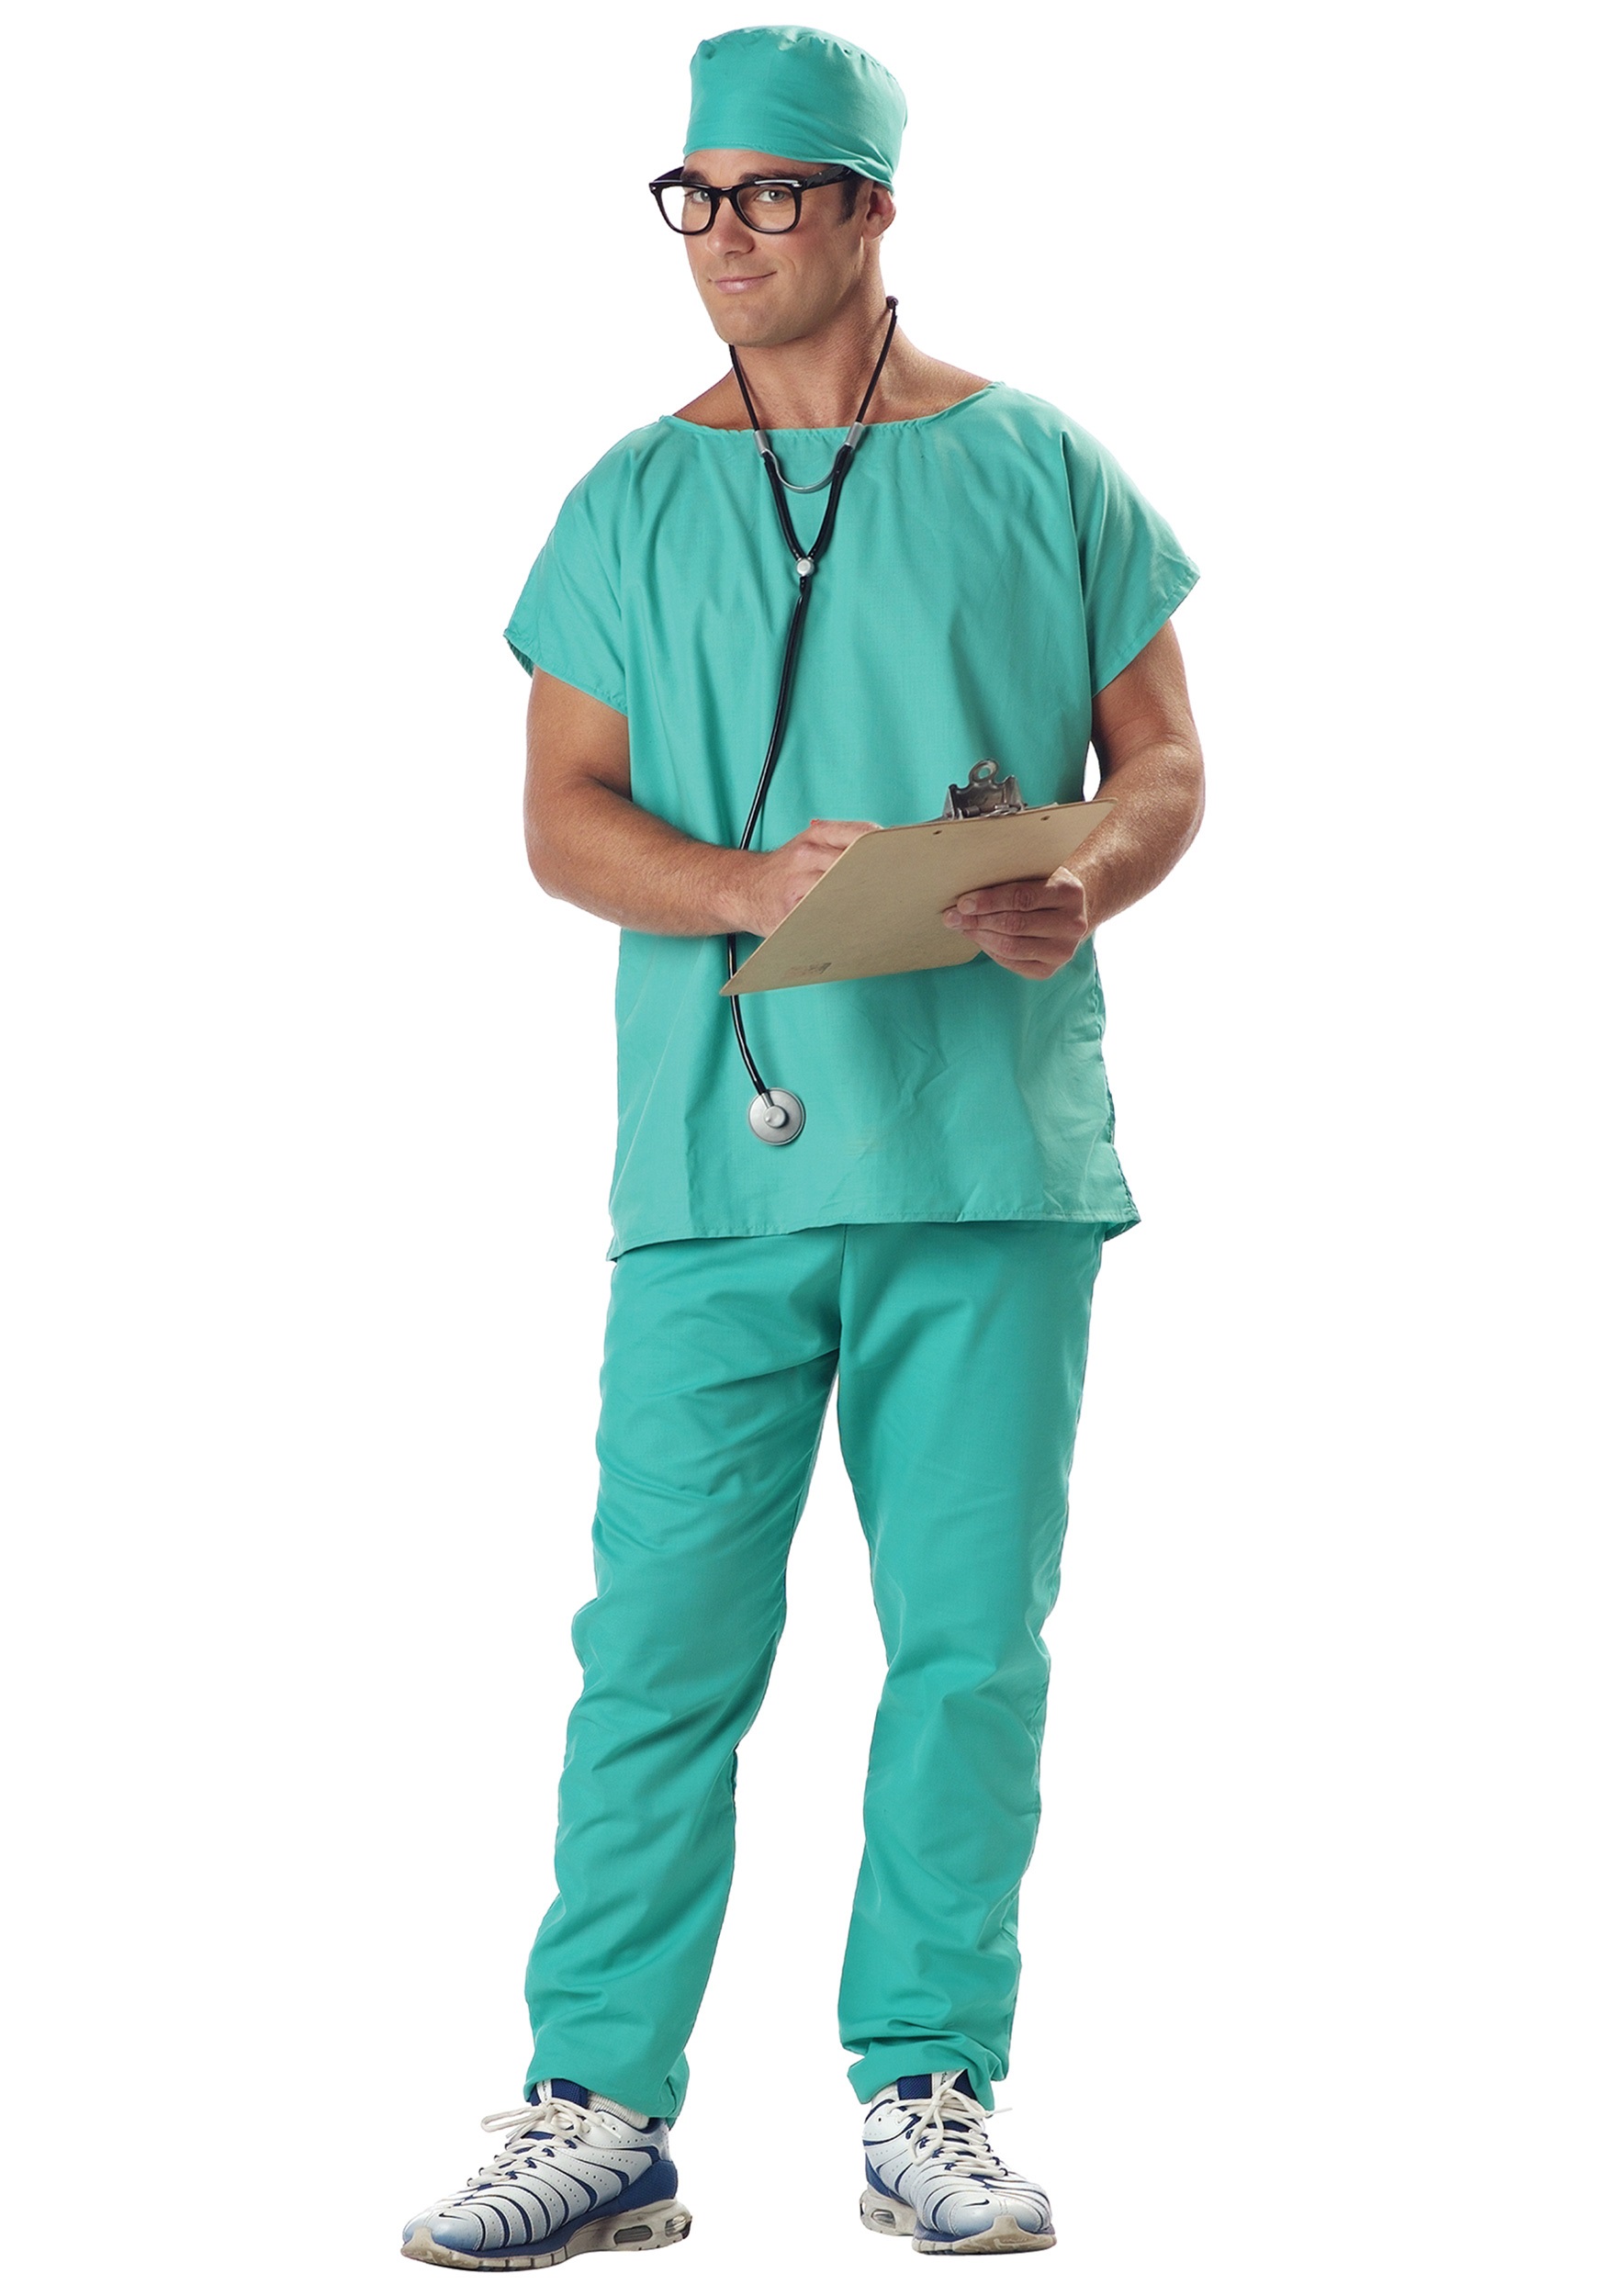 Green Scrubs Surgical Costume